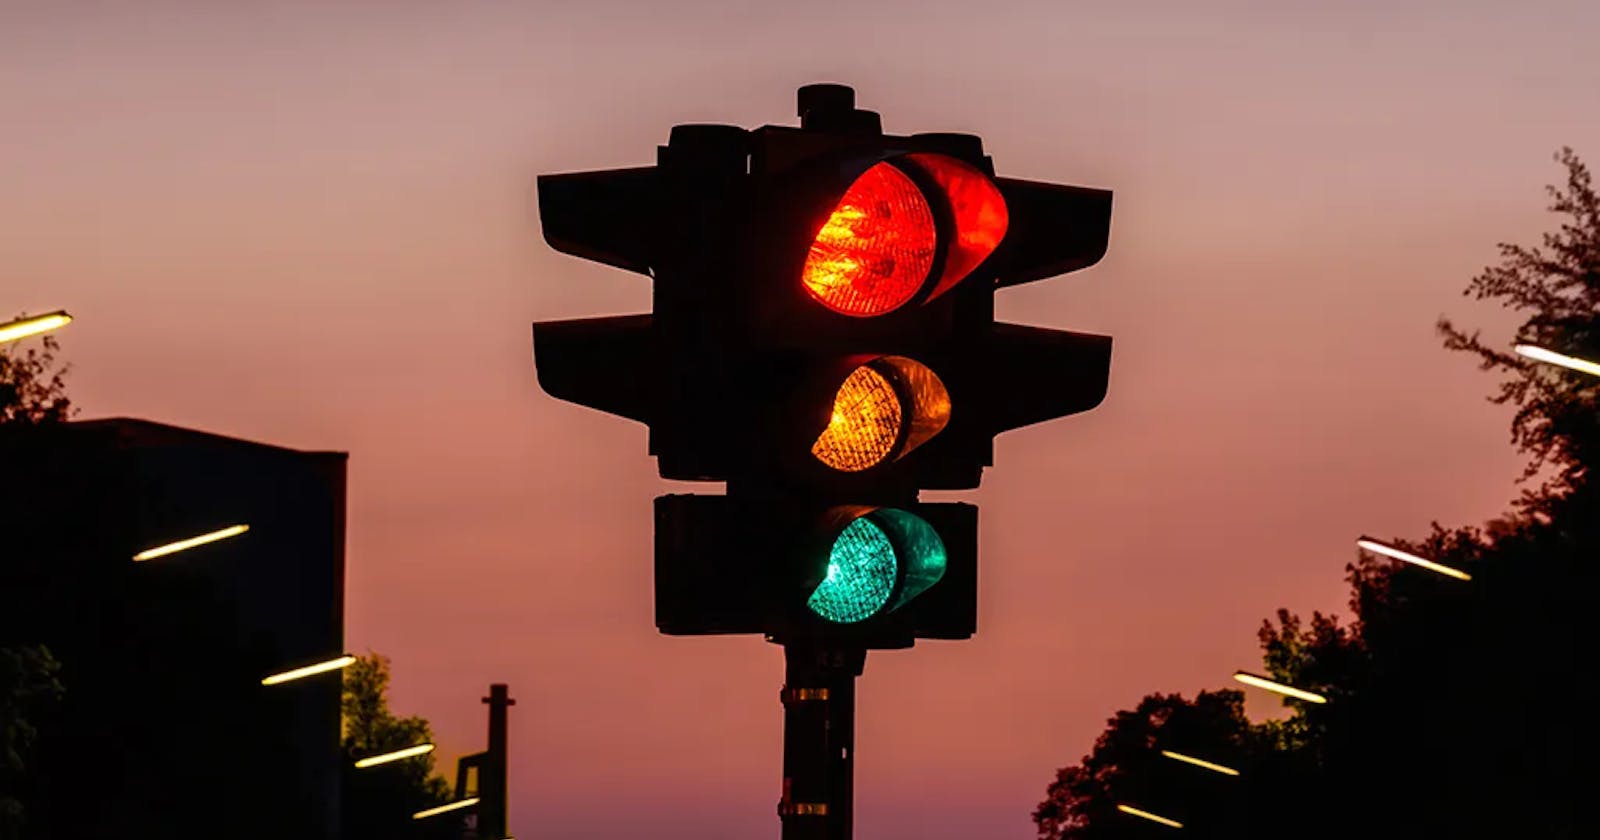 Traffic Light Detection and Classification with TensorFlow 🚦